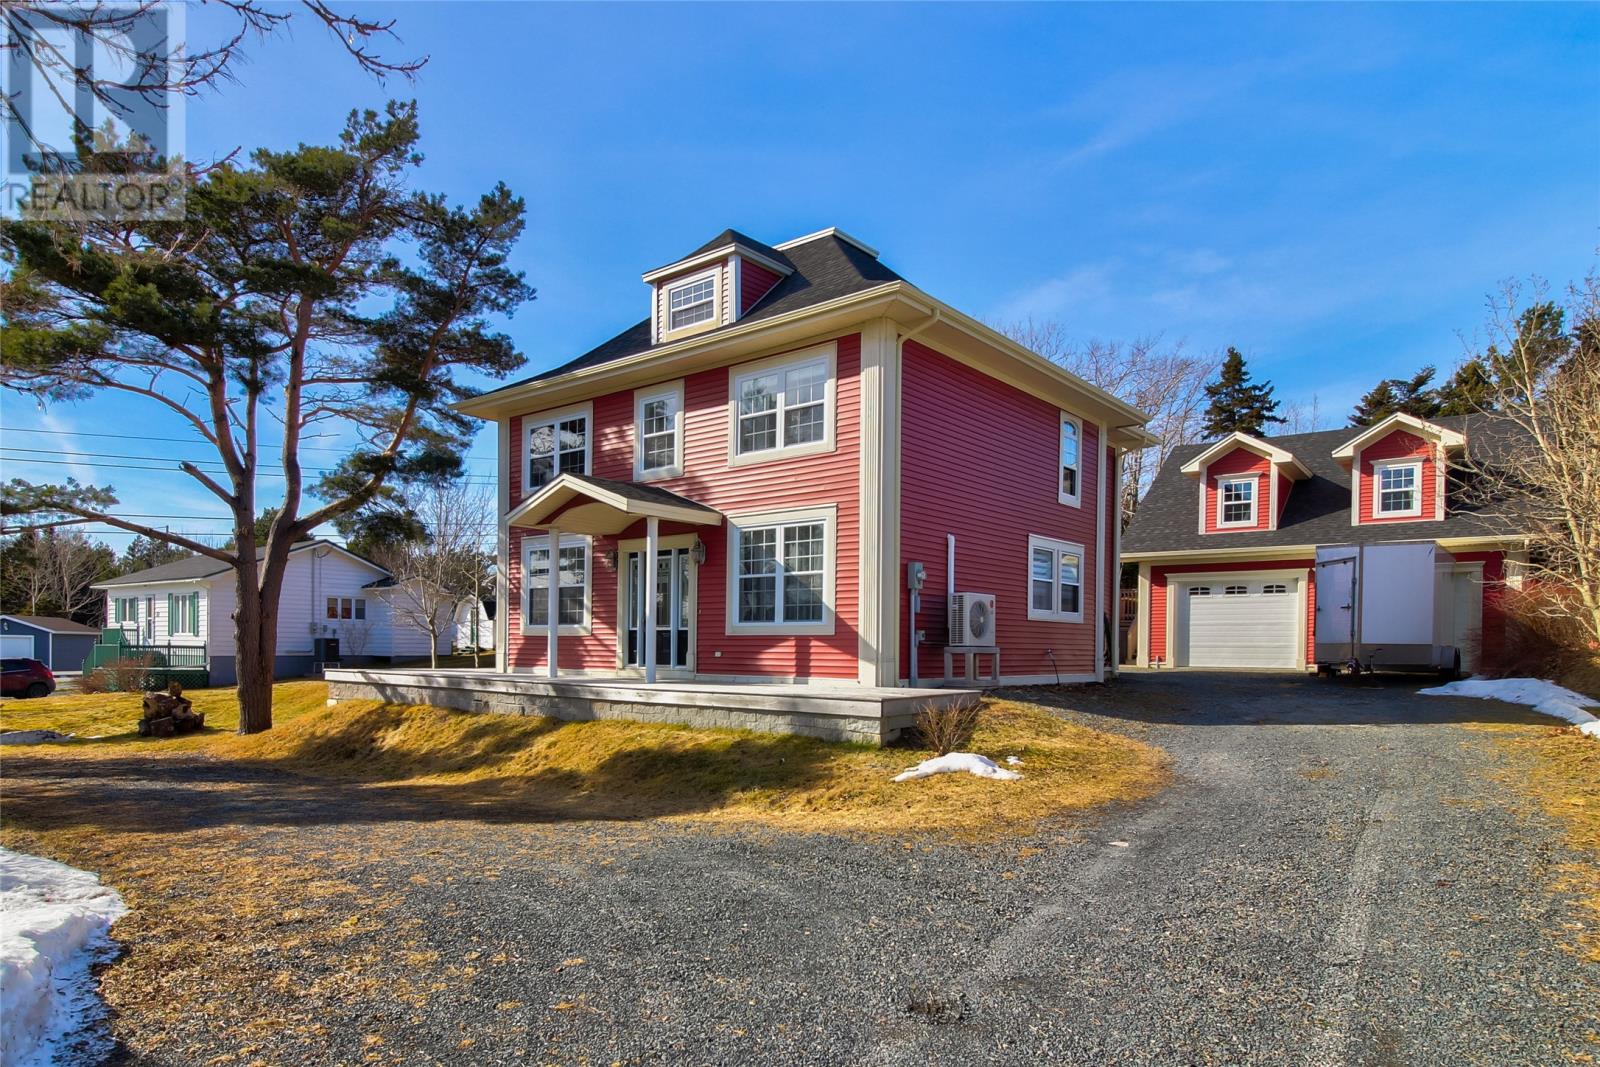 19 Coleys Point South Road, Bay Roberts, A0A1X0, 4 Bedrooms Bedrooms, ,3 BathroomsBathrooms,Single Family,For sale,Coleys Point South,1268428